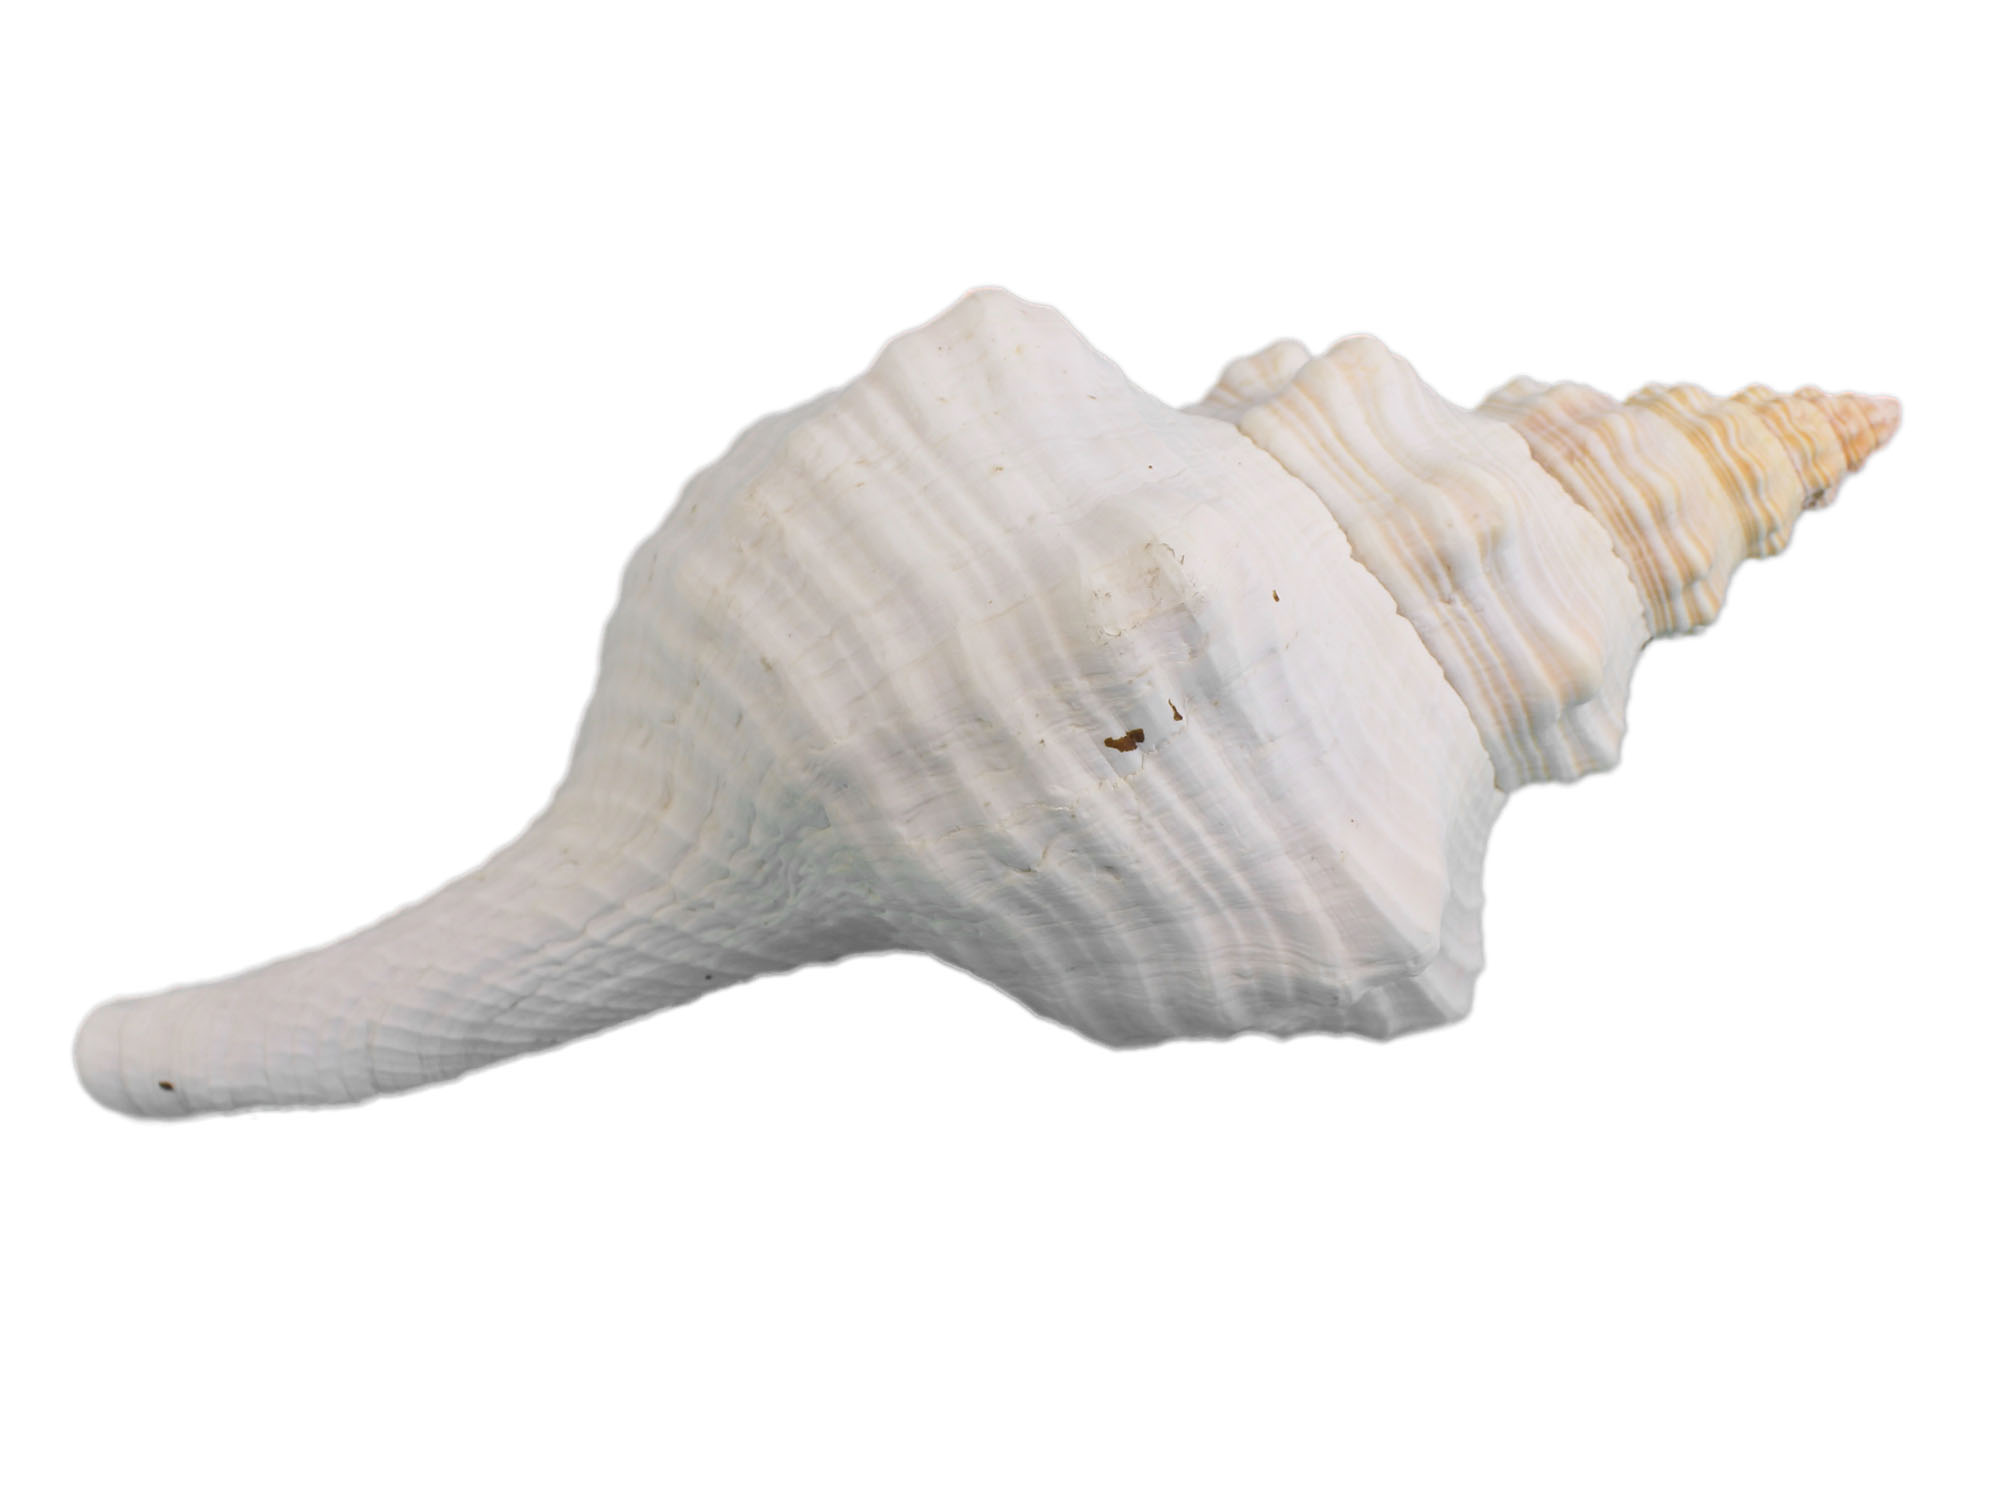 Mexican Horse Conch Shell: 10" to 11" Florida horse conch, sea snail shell